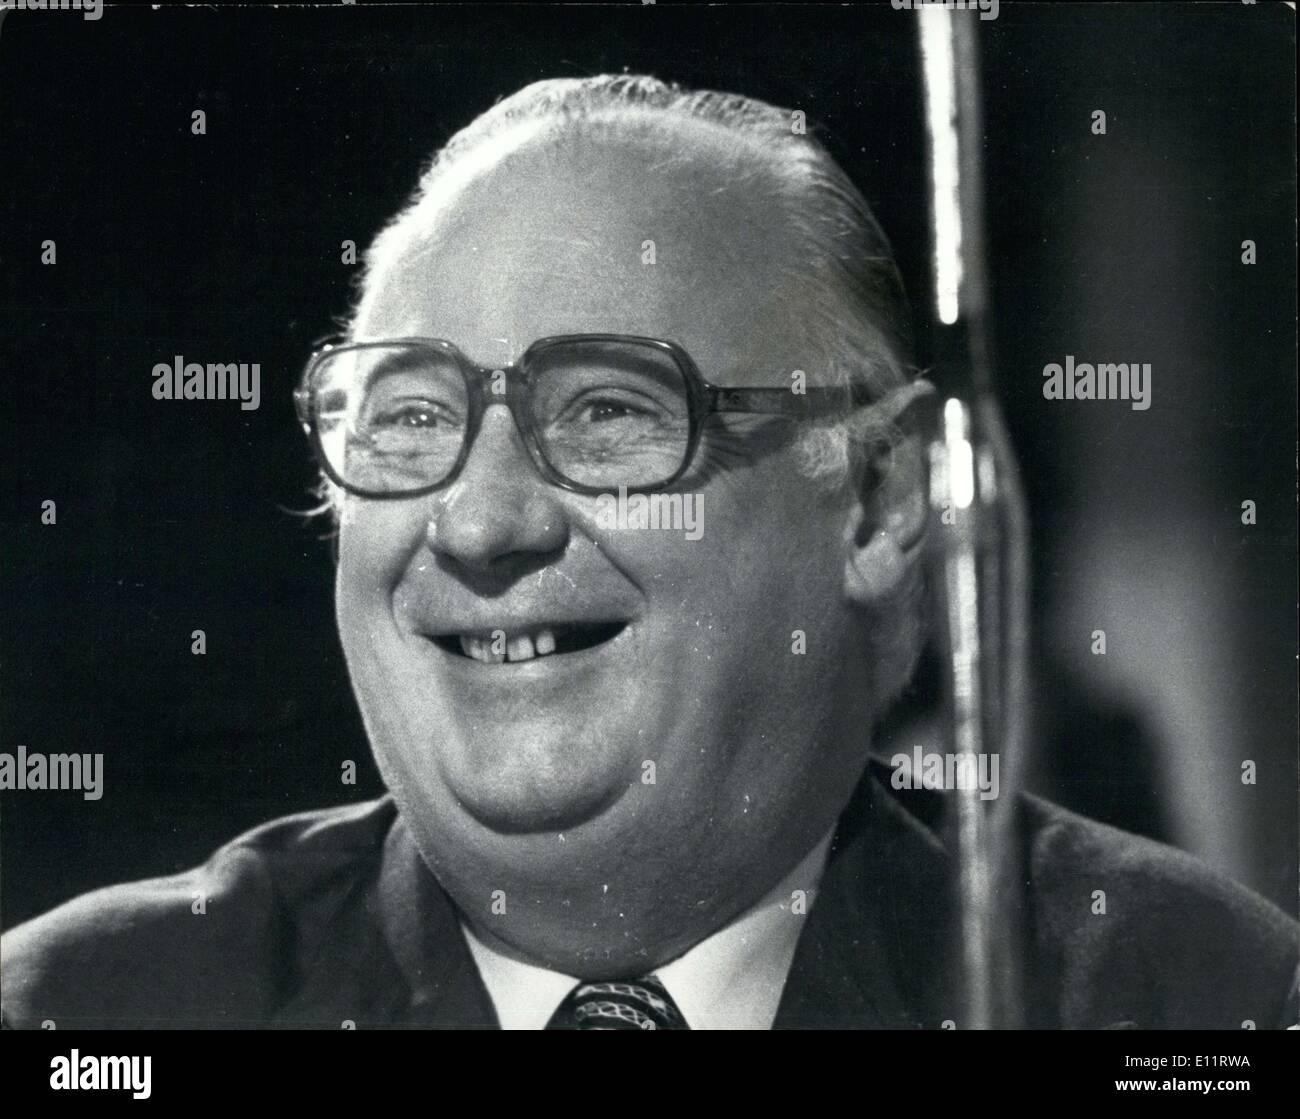 Oct. 13, 1979 - M.Michael Poniatowski at Tory party conference. Photo shows Monsieur Michael Poniatowski, President de la Commission des Affaires Etrangeres, seen during his address of the Tory Party Conference at Black poll yesterday. Stock Photo